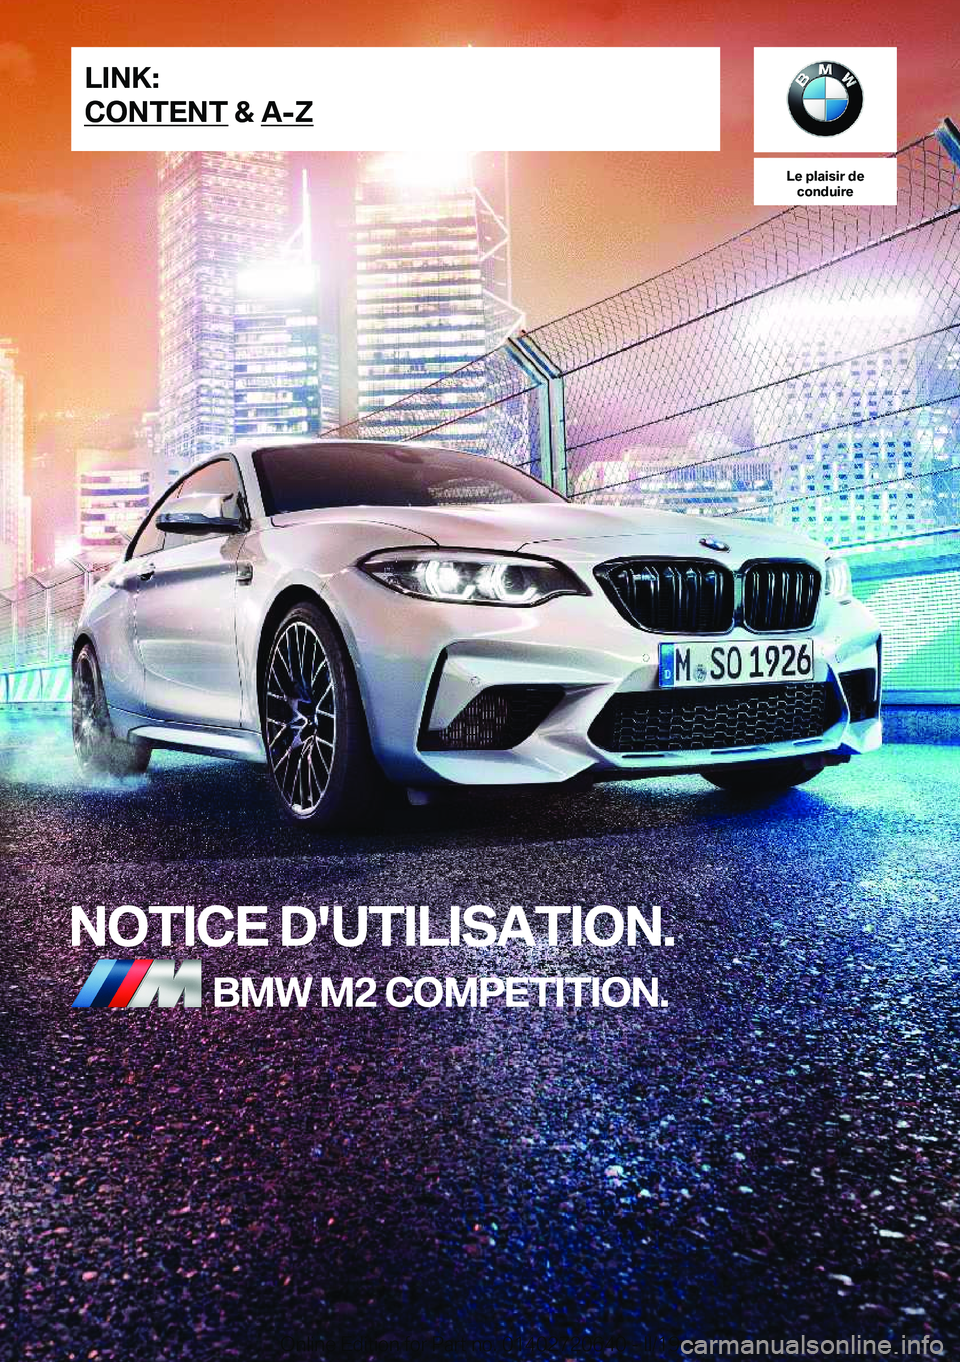 BMW M2 2020  Notices Demploi (in French) �L�e��p�l�a�i�s�i�r��d�e�c�o�n�d�u�i�r�e
�N�O�T�I�C�E��D�'�U�T�I�L�I�S�A�T�I�O�N�.�B�M�W��M�2��C�O�M�P�E�T�I�T�I�O�N�.�L�I�N�K�:
�C�O�N�T�E�N�T��&��A�-�;�O�n�l�i�n�e��E�d�i�t�i�o�n��f�o�r